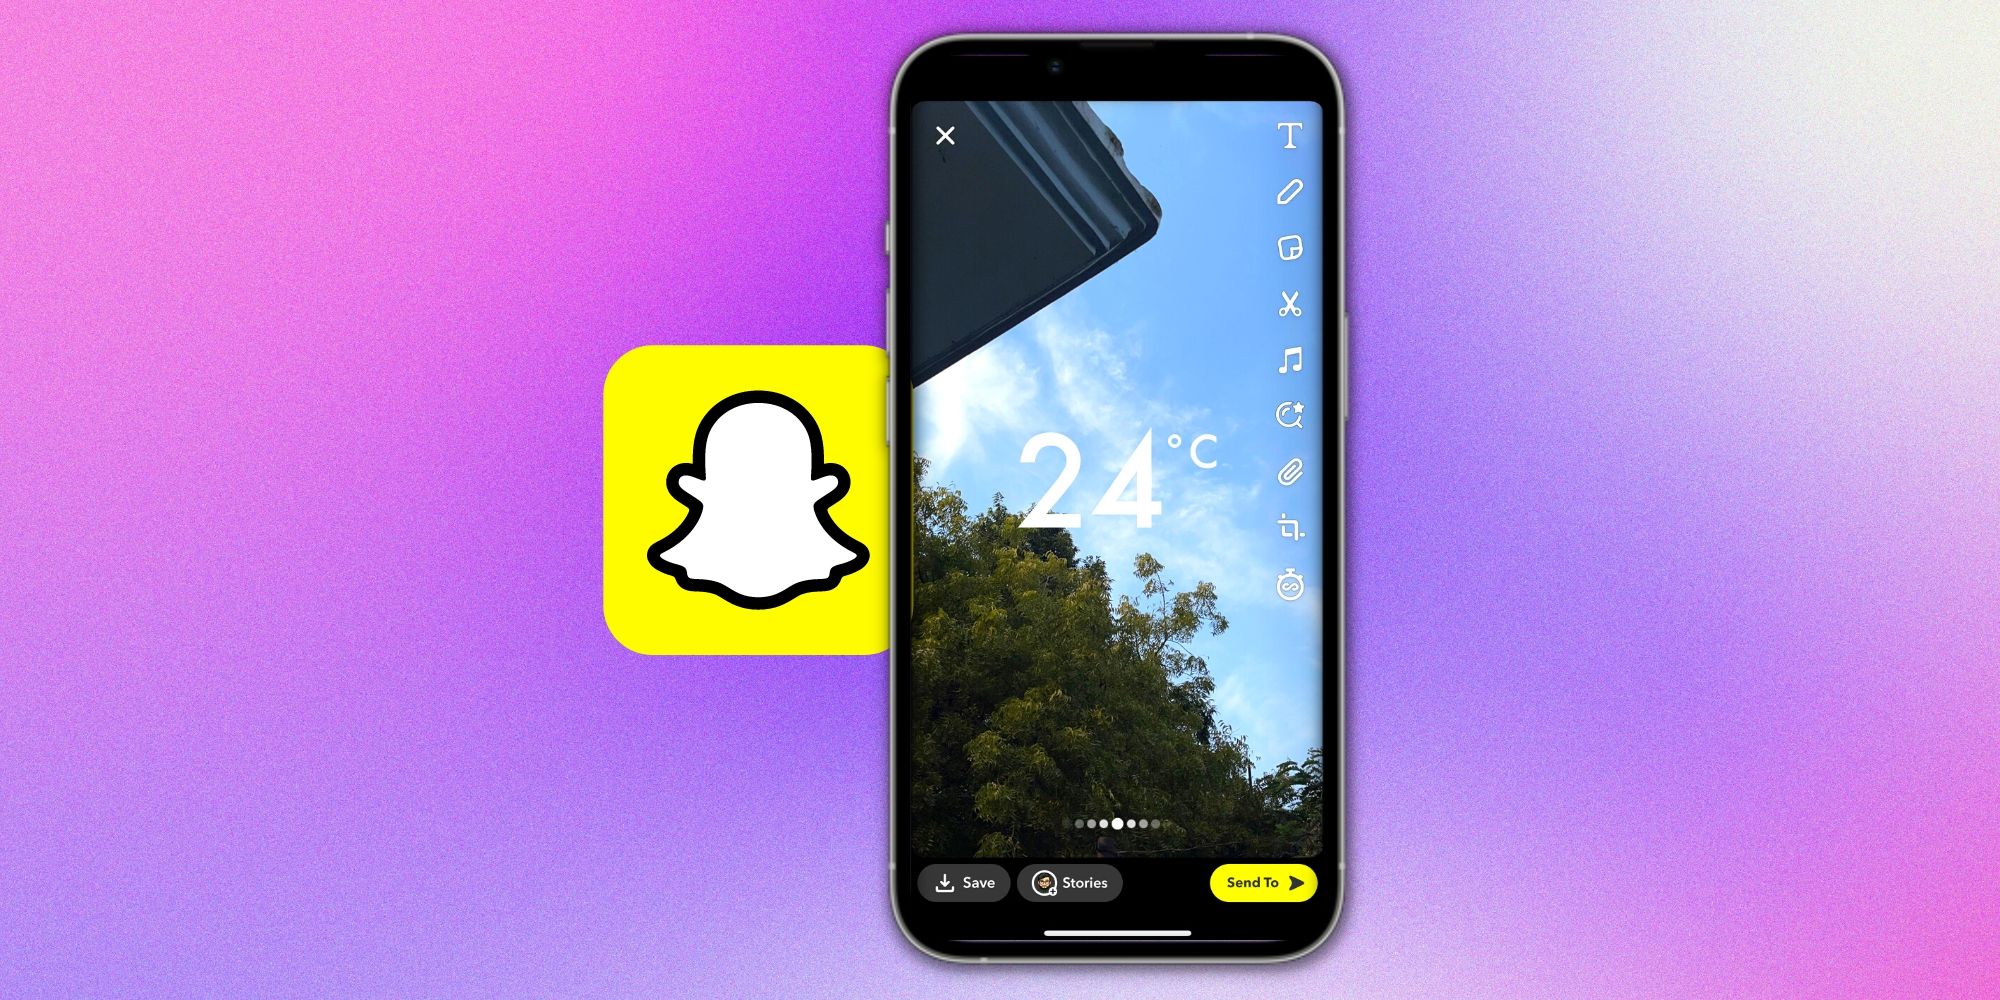 A screenshot of Snapchat's temperature sticker with logo on a colorful background